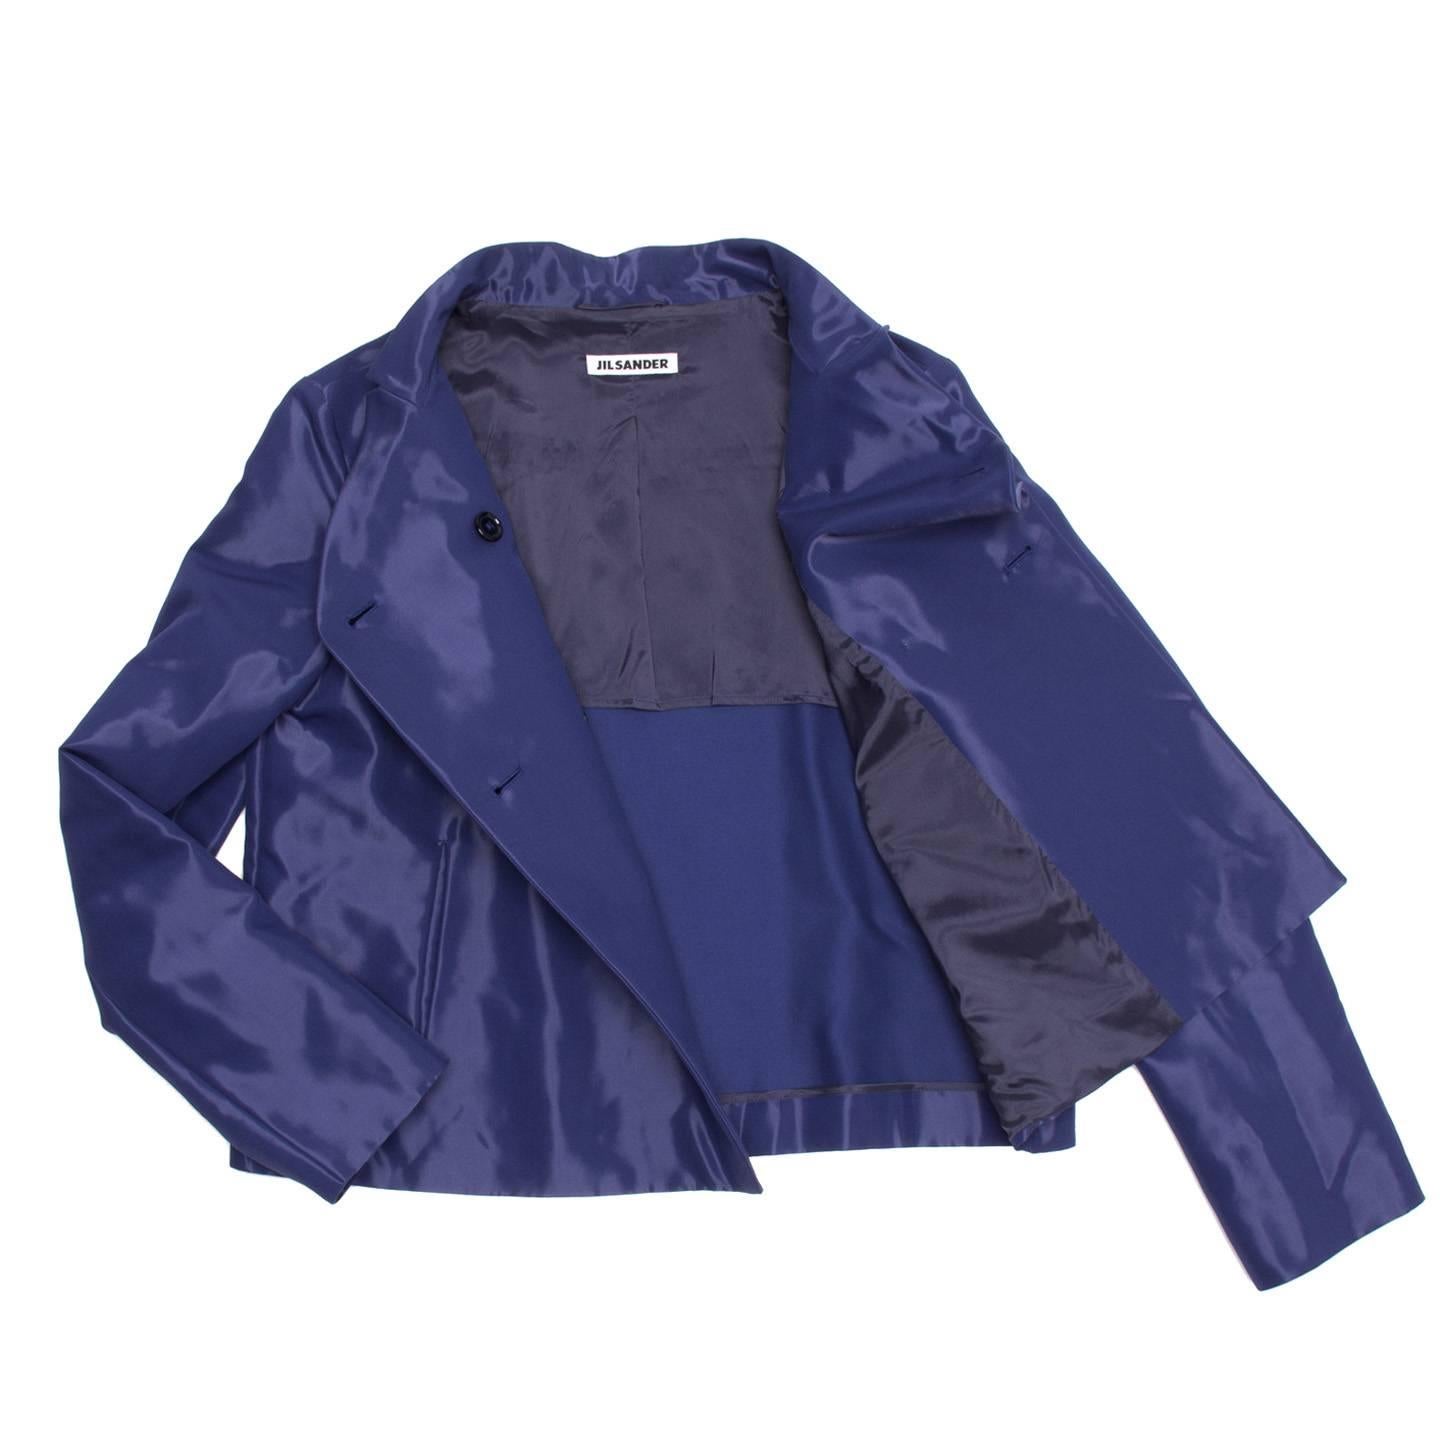 Jil Sander Blue Shiny Cropped Jacket In New Condition For Sale In Brooklyn, NY